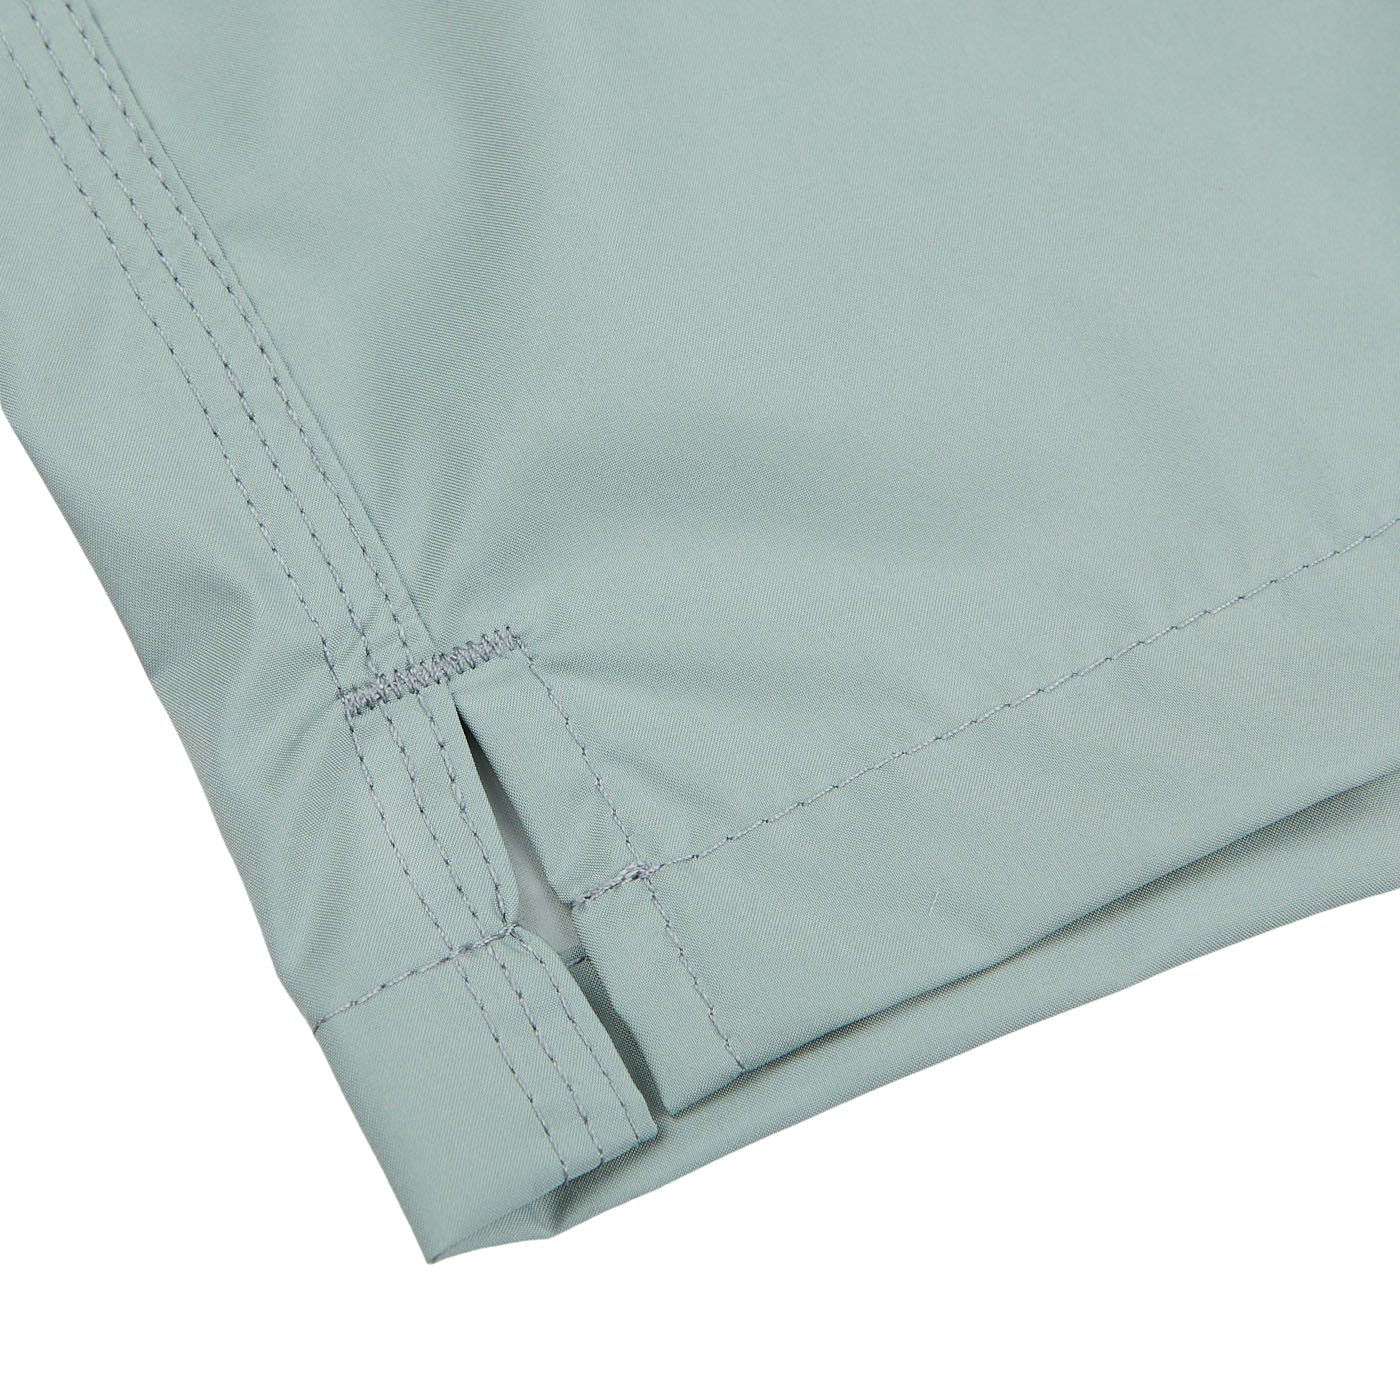 Close-up of Sage Green Madeira Microfiber Swim Shorts by Fedeli showing detailed stitching and a folded seam.